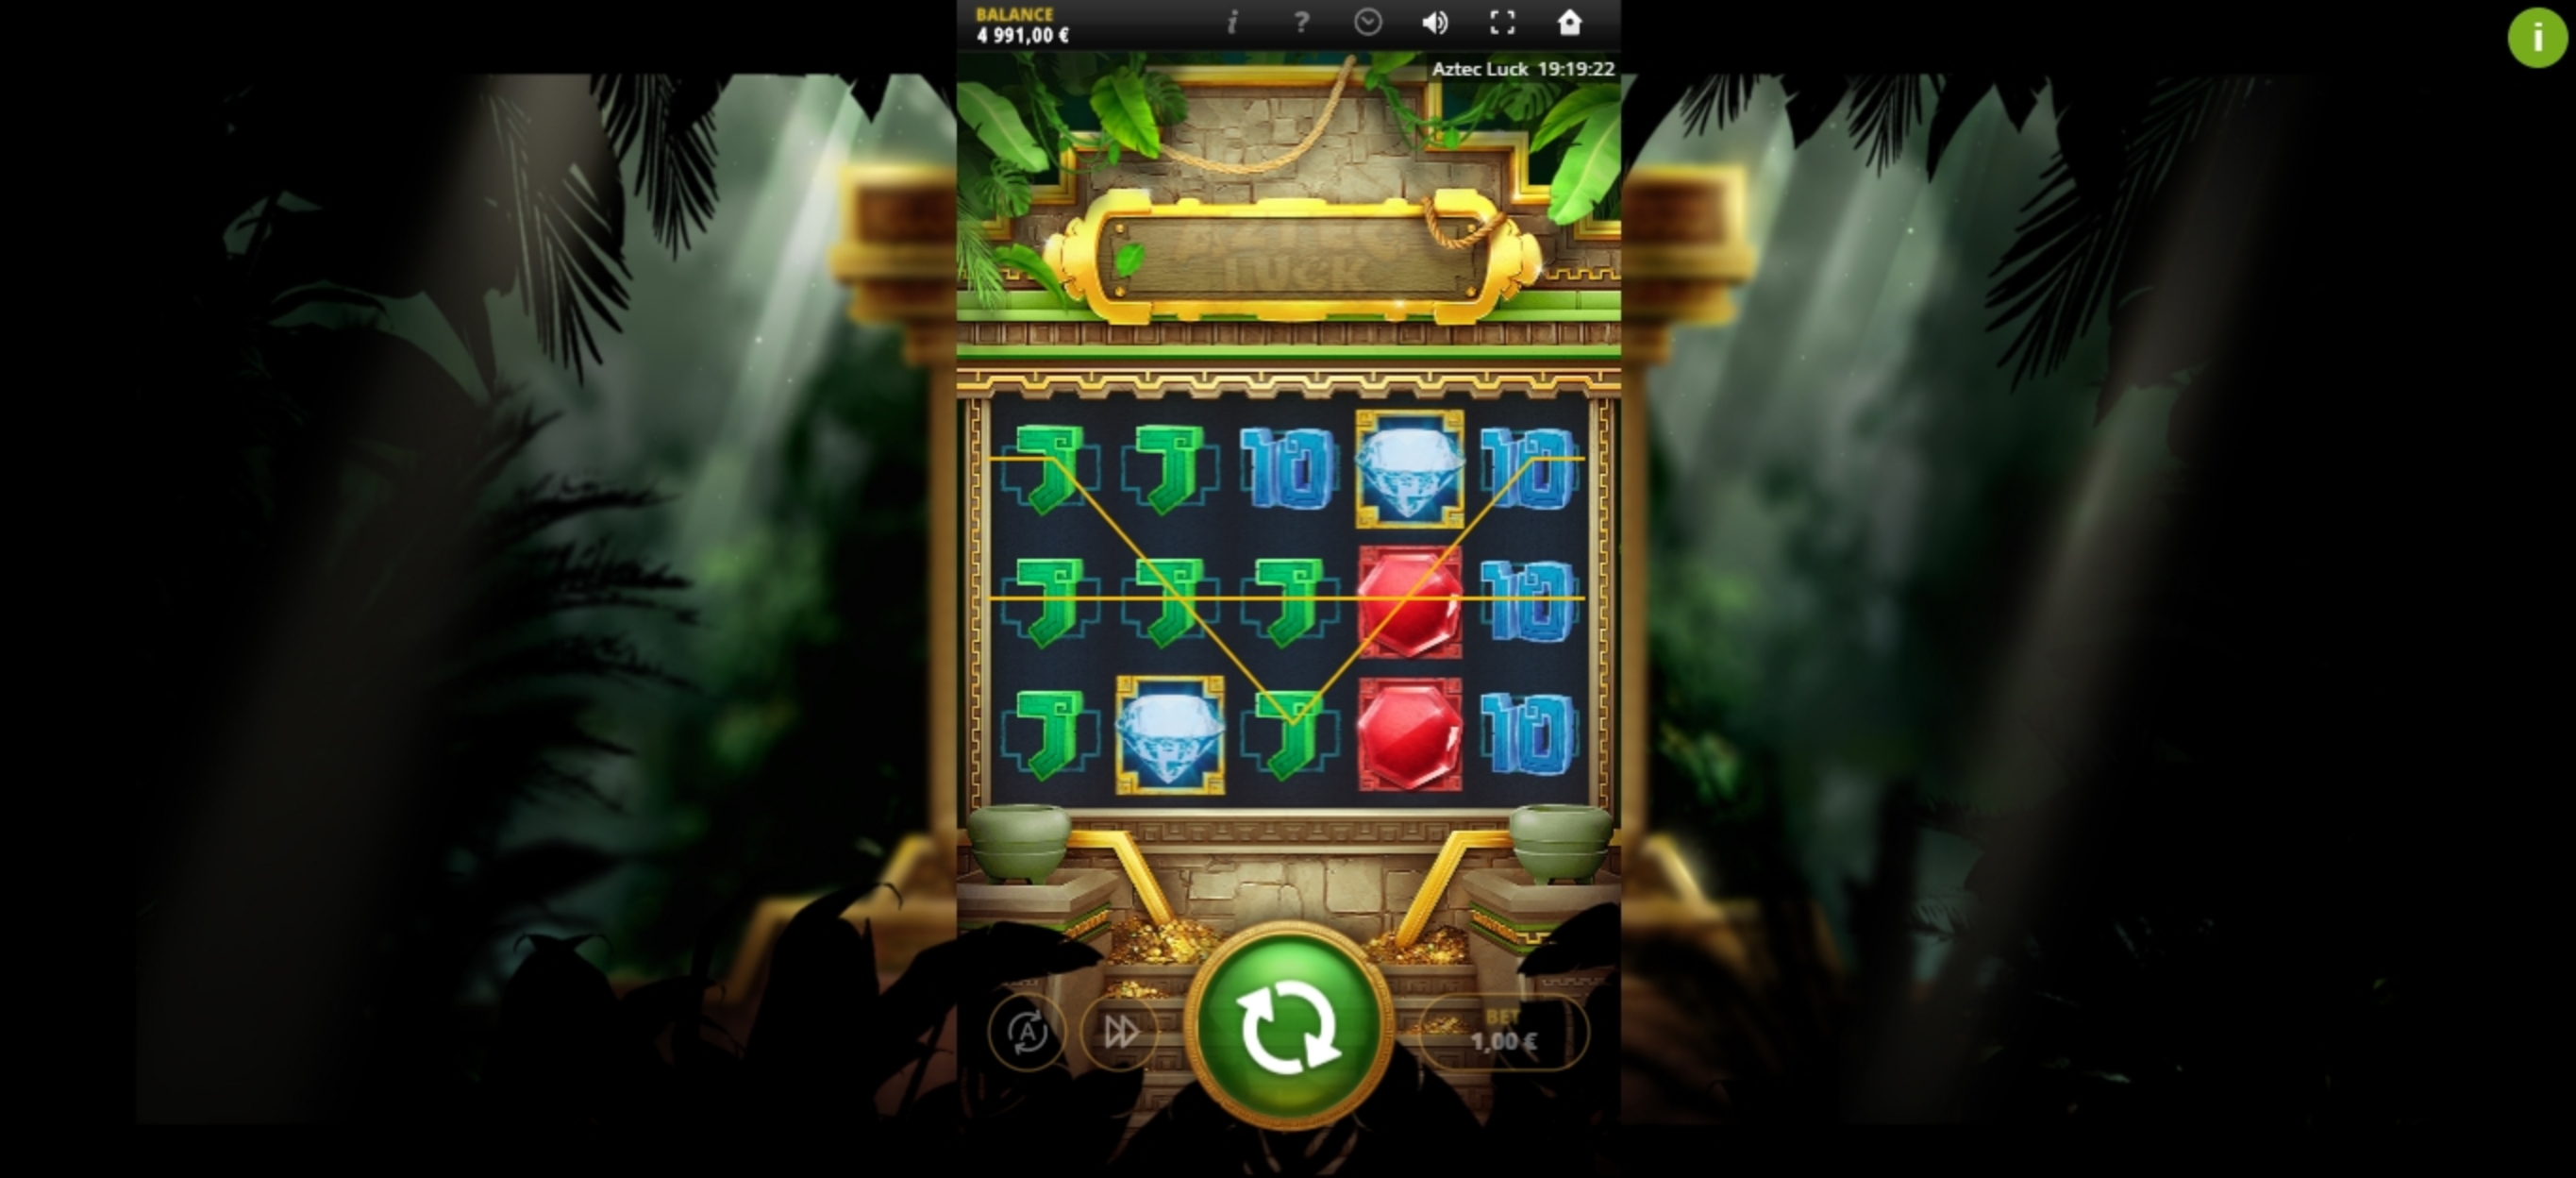 Win Money in Aztec Luck Free Slot Game by Silverback Gaming